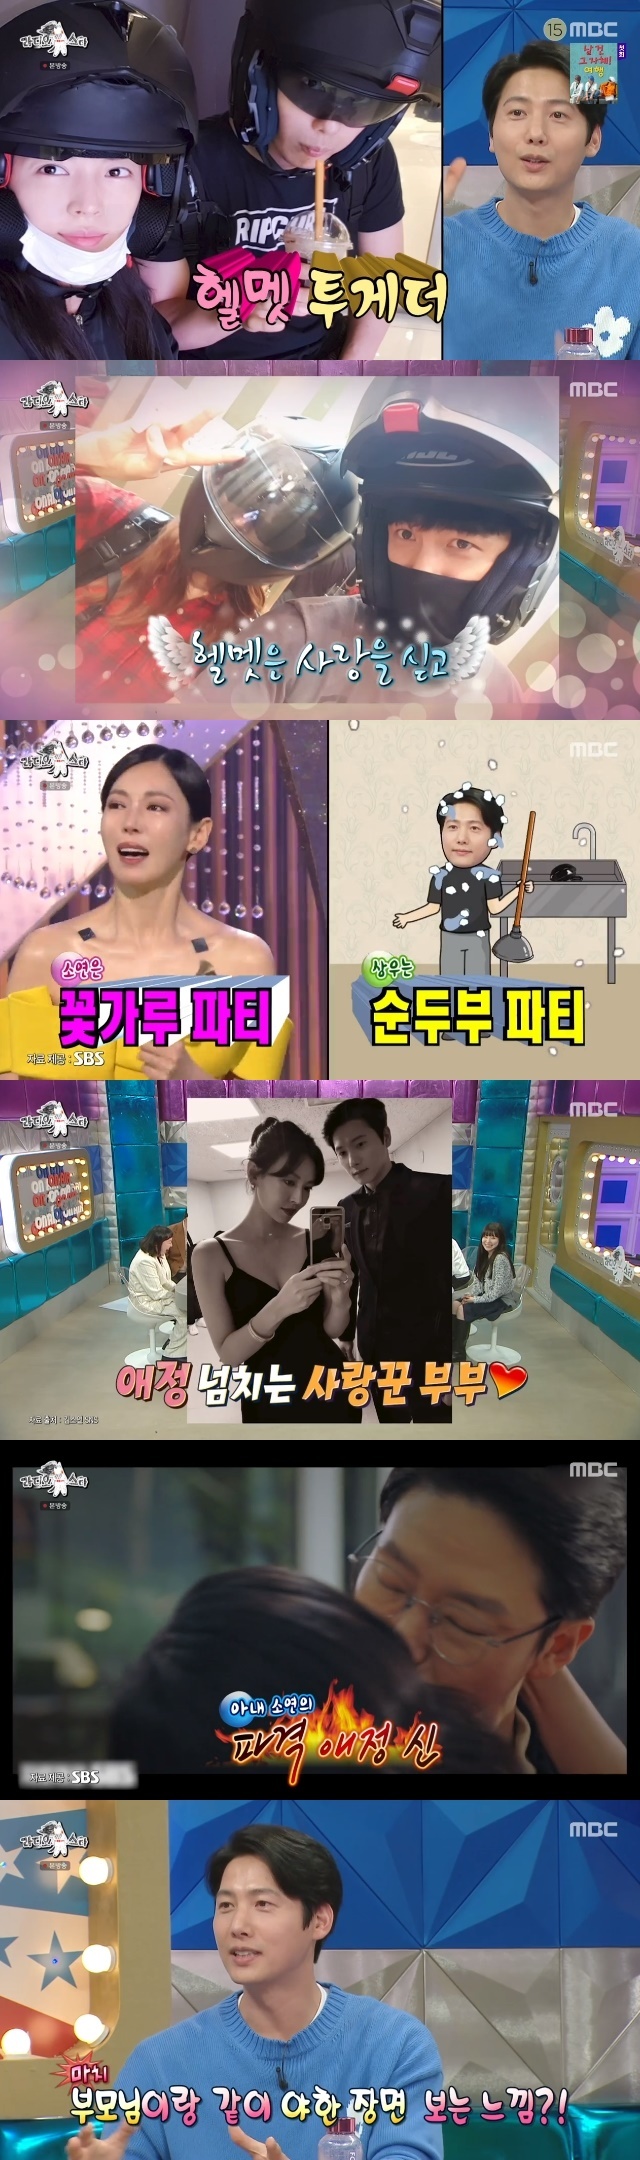 Actor Lee Sang-woo has revealed his Feelingss as a husband to Kim So-yeons love scene.Lee Sang-woo, Solbi, Hoy Park, and Kim Ah-young appeared as guests in the 820th episode of MBCs entertainment show Radio Star (hereinafter referred to as Radio Star), which aired on June 7, to celebrate the On a Clear-eyed Night feature.On this day, Lee Sang-woo mentioned Lee Su-jis name as a special MC, I heard a lot from my wife, referring to his wife Kim So-yeon.Lee Su-ji and Kim So-yeon have appeared together in a drama called Inconvenient to Genuine and are still in contact with No Strings Attached.Lee Sang-woo proved his friendship by saying, So-yeon is not so many friends, but No Strings Attached, which is pretty close to his name.Lee Sang-woo said that Kim So-yeon is not active, likes home, and does not meet friends well. He said that he is currently taking a TVN drama Kumiho  ⁇  1938.Gim Gu-ra said, I live in Seoul, but I do not live a rural life in Yangpyeong. He said, It is not so. Kim So-yeons outing is sometimes enough to go out to eat in front of the house.Lee Sang-woo was famous for composing a shark song when a shark that was released in a company pond was caught by a crawfishs tongs.Lee Sang-woo admitted that the song is not only for performing arts, but I rarely call it in my daily life.Sometimes when I call it at home, So-yeon is so good that Im listening to it.Lee Sang-woo then reported the news that the follow-up song of Shark Song came out.The finished song of Shark Song was How should the shark live? But now that the lobster is dead, I have put goldfish in it and got enlightened and made a song called I know a little bit why people grow goldfish now.However, Lee Sang-woo said that this is the last song, I felt like I heard it when I called it, and I felt bad.Lee Sang-woo made a strange move, such as immersing a stone in curiosity before his debut, and releasing a traffic light after his debut.Lee Sang-woo confessed that he had acted to embarrass Kim So-yeon even when he was dating Kim So-yeon before marriage.He said, We both have motorcycle licenses. We bought a motorcycle. So-yeon started his career in the entertainment industry early on. I havent been to many markets, so I bought two helmets and went to the market and radioed.I went to the market in the city on a motorcycle and said, Do you want to eat this?So-yeon is heavy to eat and wants to take off, but because he feels joy to win this weight, he said Helmets weight. Lee Sang-woo said, I wanted to go around the market easily, Lee Sang-woo said.When asked if people had noticed him, he said, You have to endure that much to get a sweet, and added, I looked at him, but I thought he was a delivery man. So-yeon (finally) was carrying a bag.When Kim So-yeon was mentioned in the SBS drama Penthouse, Lee Sang-woo said, I am also in this drama (Red Balloon).I didnt mean to, but since were both learning, we understand each other, but we dont have to see each other. I dont know where the agreement came from, but then I go to my room or go to the bathroom.He asked the MCs mischievous question, Do you cough at that time?I feel like Im Feelings like Im with my parents. When asked if I was jealous, I answered I thought I did not, but it was strange.Lee Sang-woo also revealed that Kim So-yeon had another party (?) at home when she was postponed to Penthouse.He said, When I came to workout, So-yeon seemed to have eaten sun-dubu lightly because he was going to be postponed. I was left behind and the sink was blocked. The trail that I tried to send down somehow was full of water.I took a break and tried to work, but I did not fall in. I remembered the plunger. I washed it, and there was a part where the water was falling next to it.Lee Sang-woo reminded me that Kim So-yeon, who came back after a love affair, had a simple meal.